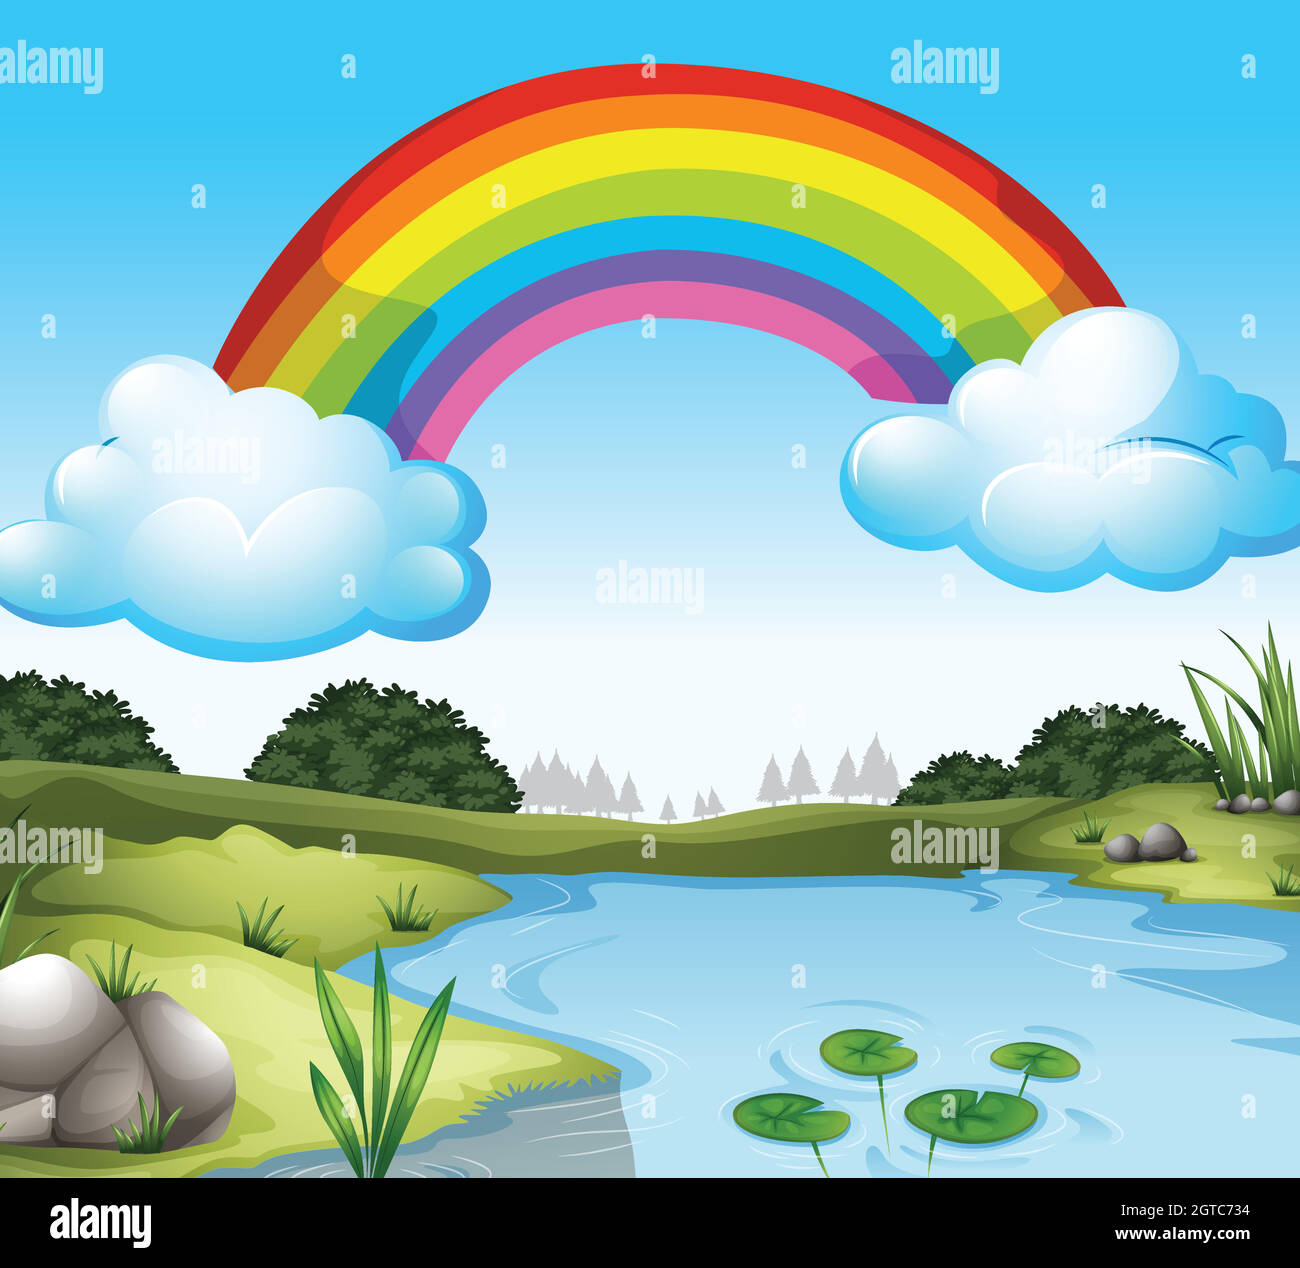 A beautiful scenery with a rainbow in the sky Stock Vector